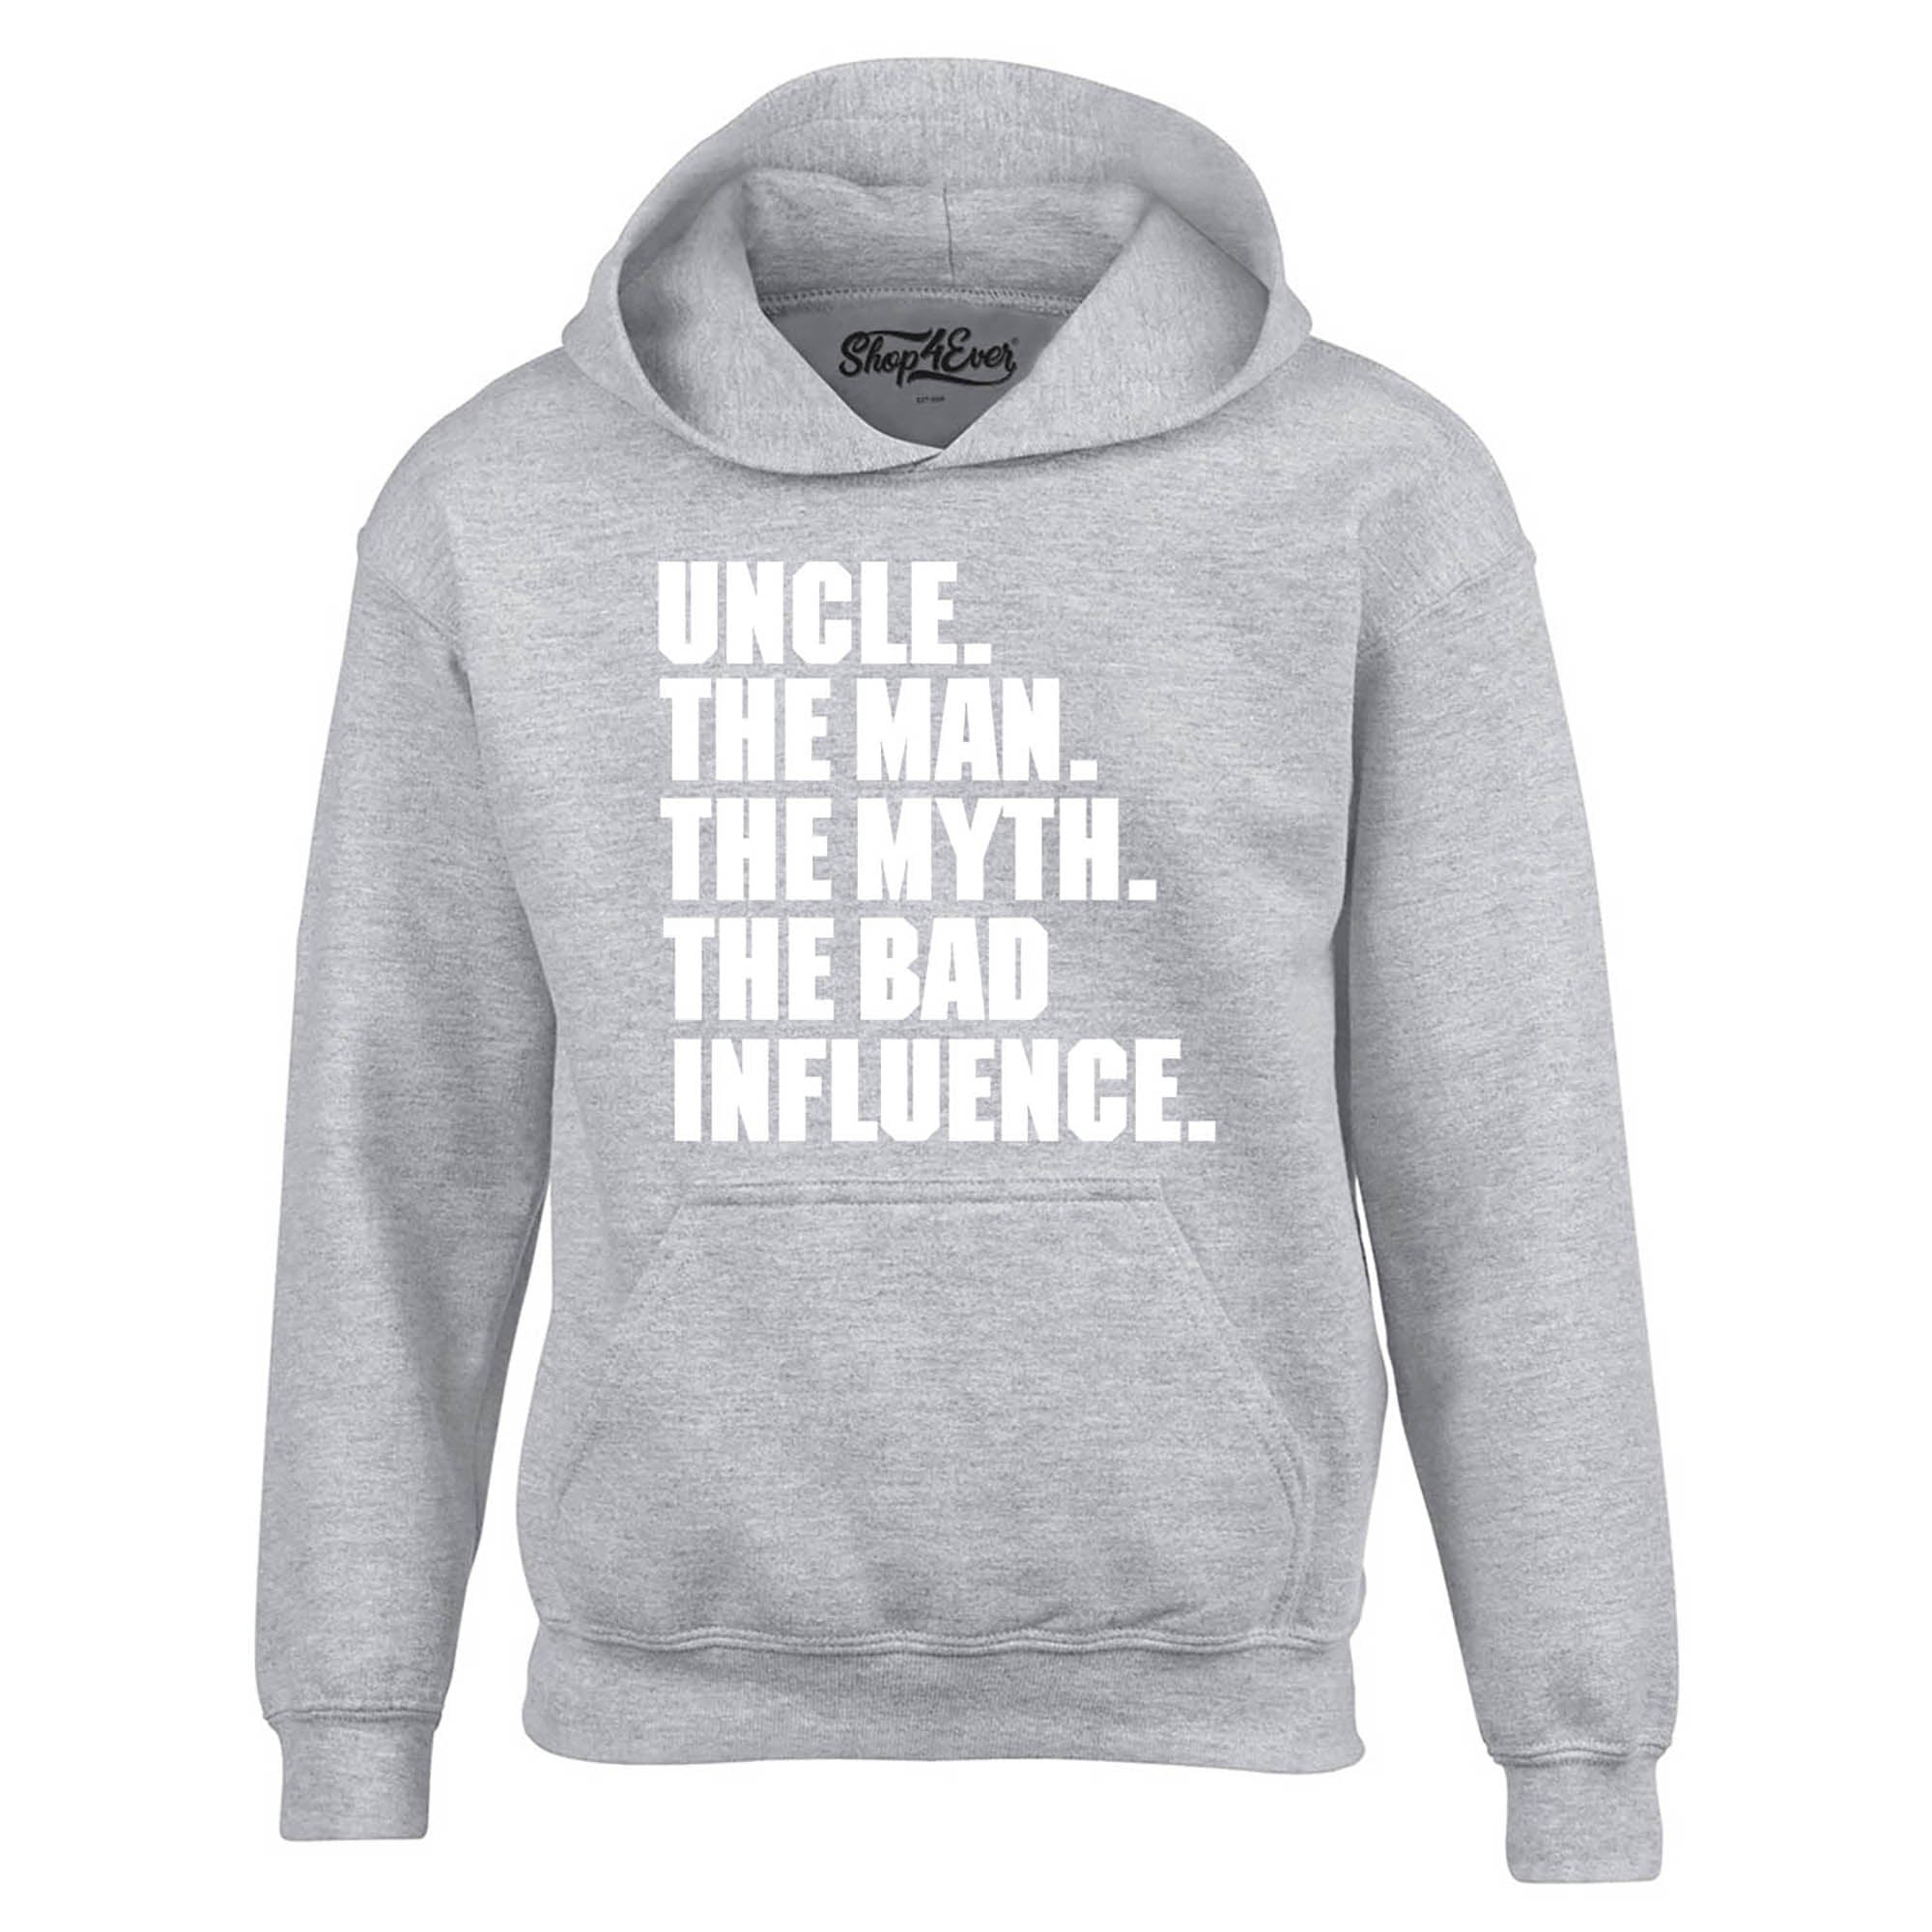 Uncle The Man The Myth The Bad Influence Hoodie Sweatshirts